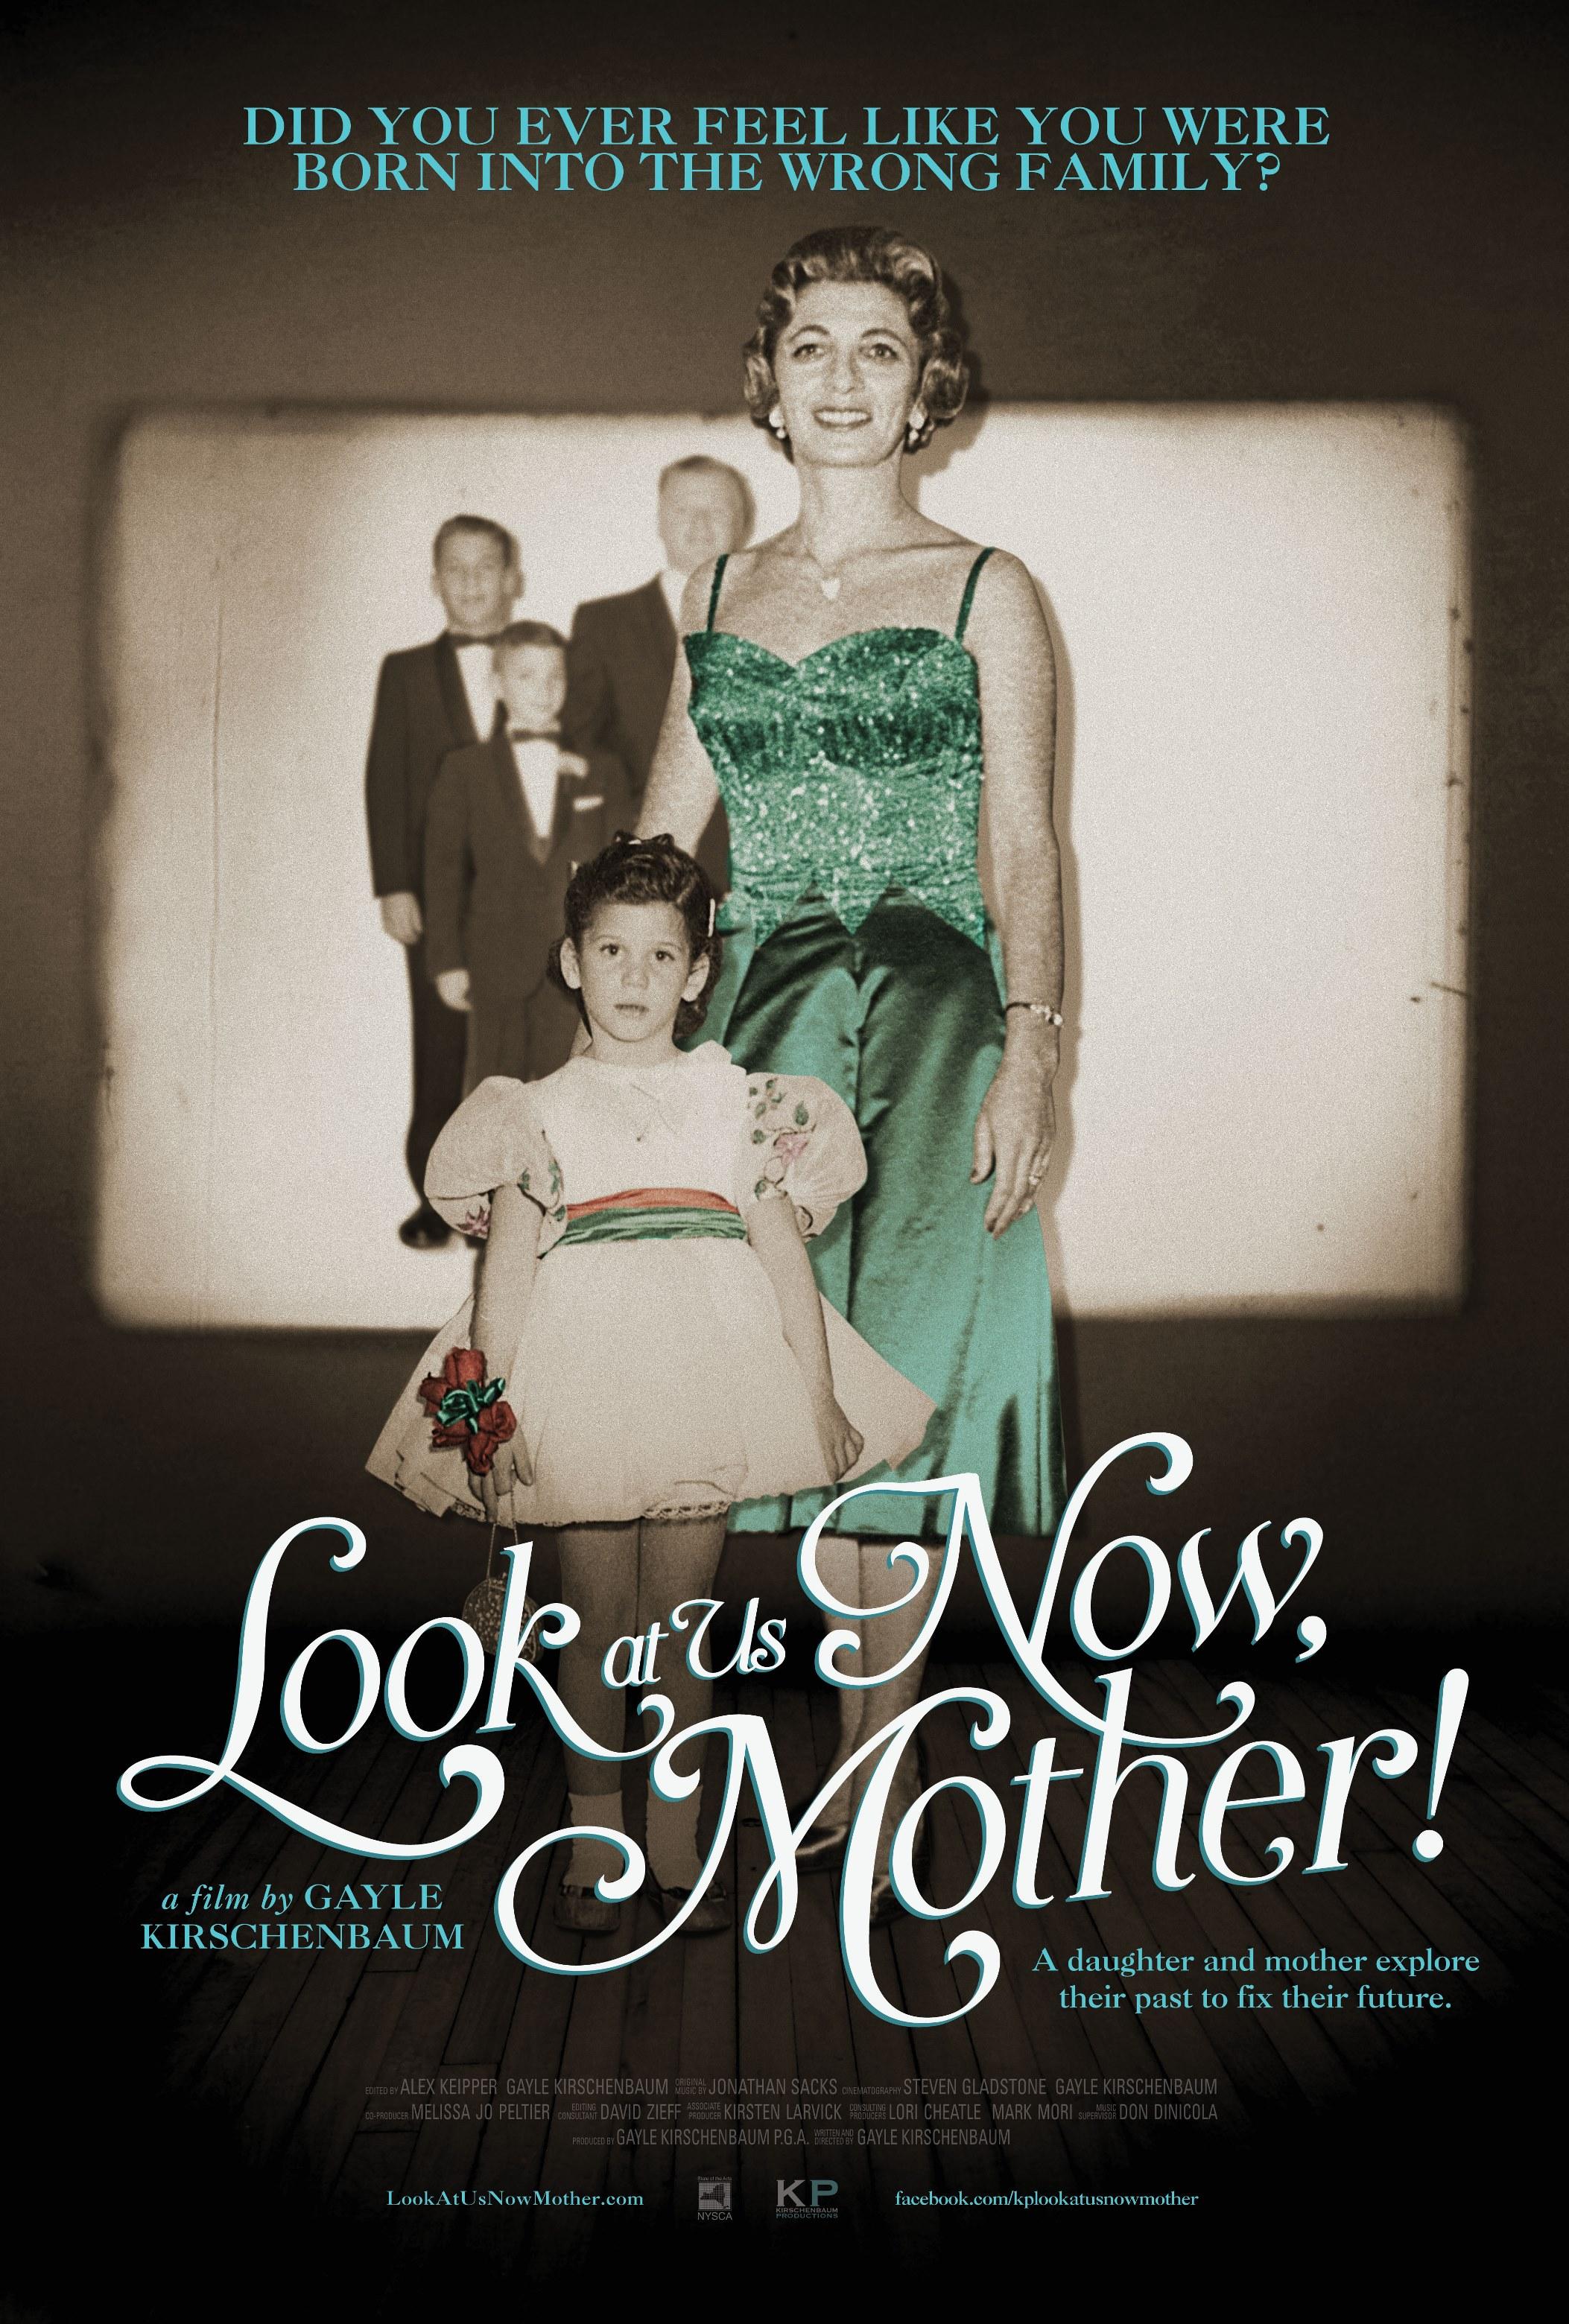 Movies: Look at us Now, Mother